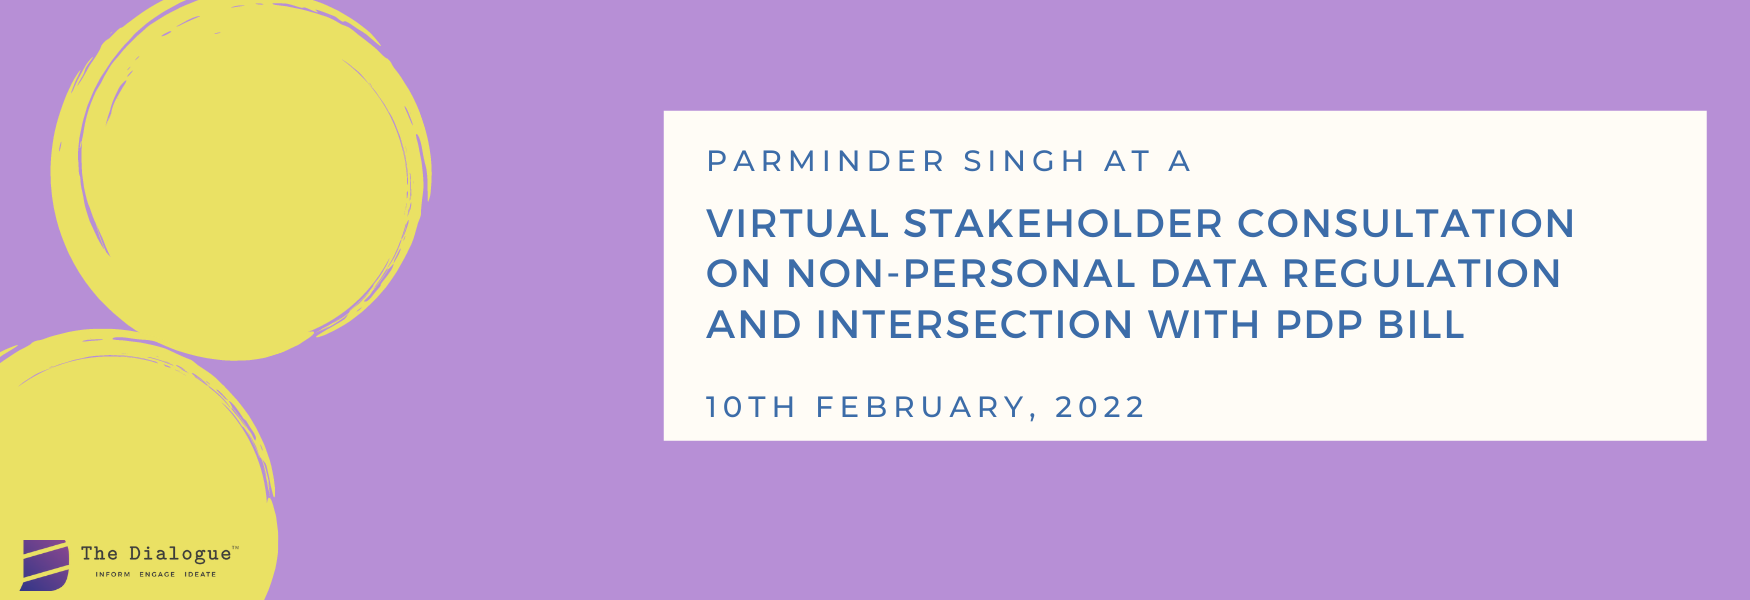 Virtual Stakeholder Consultation on Non-Personal Data Regulation and Intersection with PDP Bill